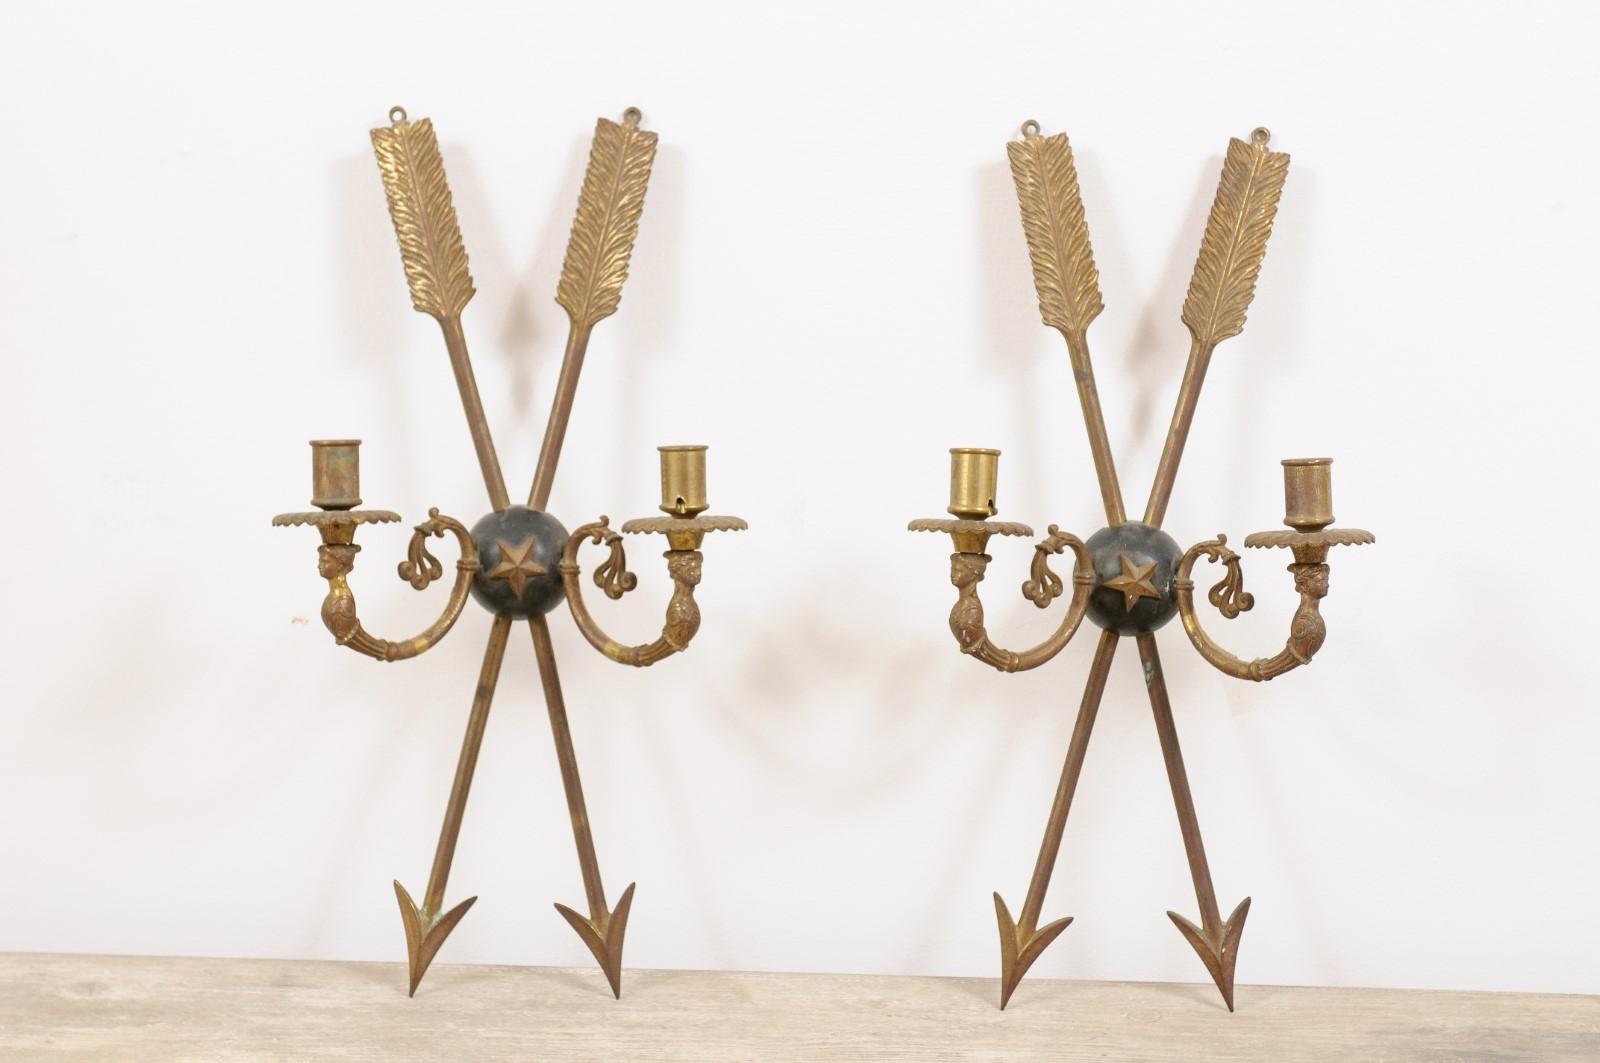 Why we love them: This pair of exquisite 18th century. Directoire brass sconces had us at 